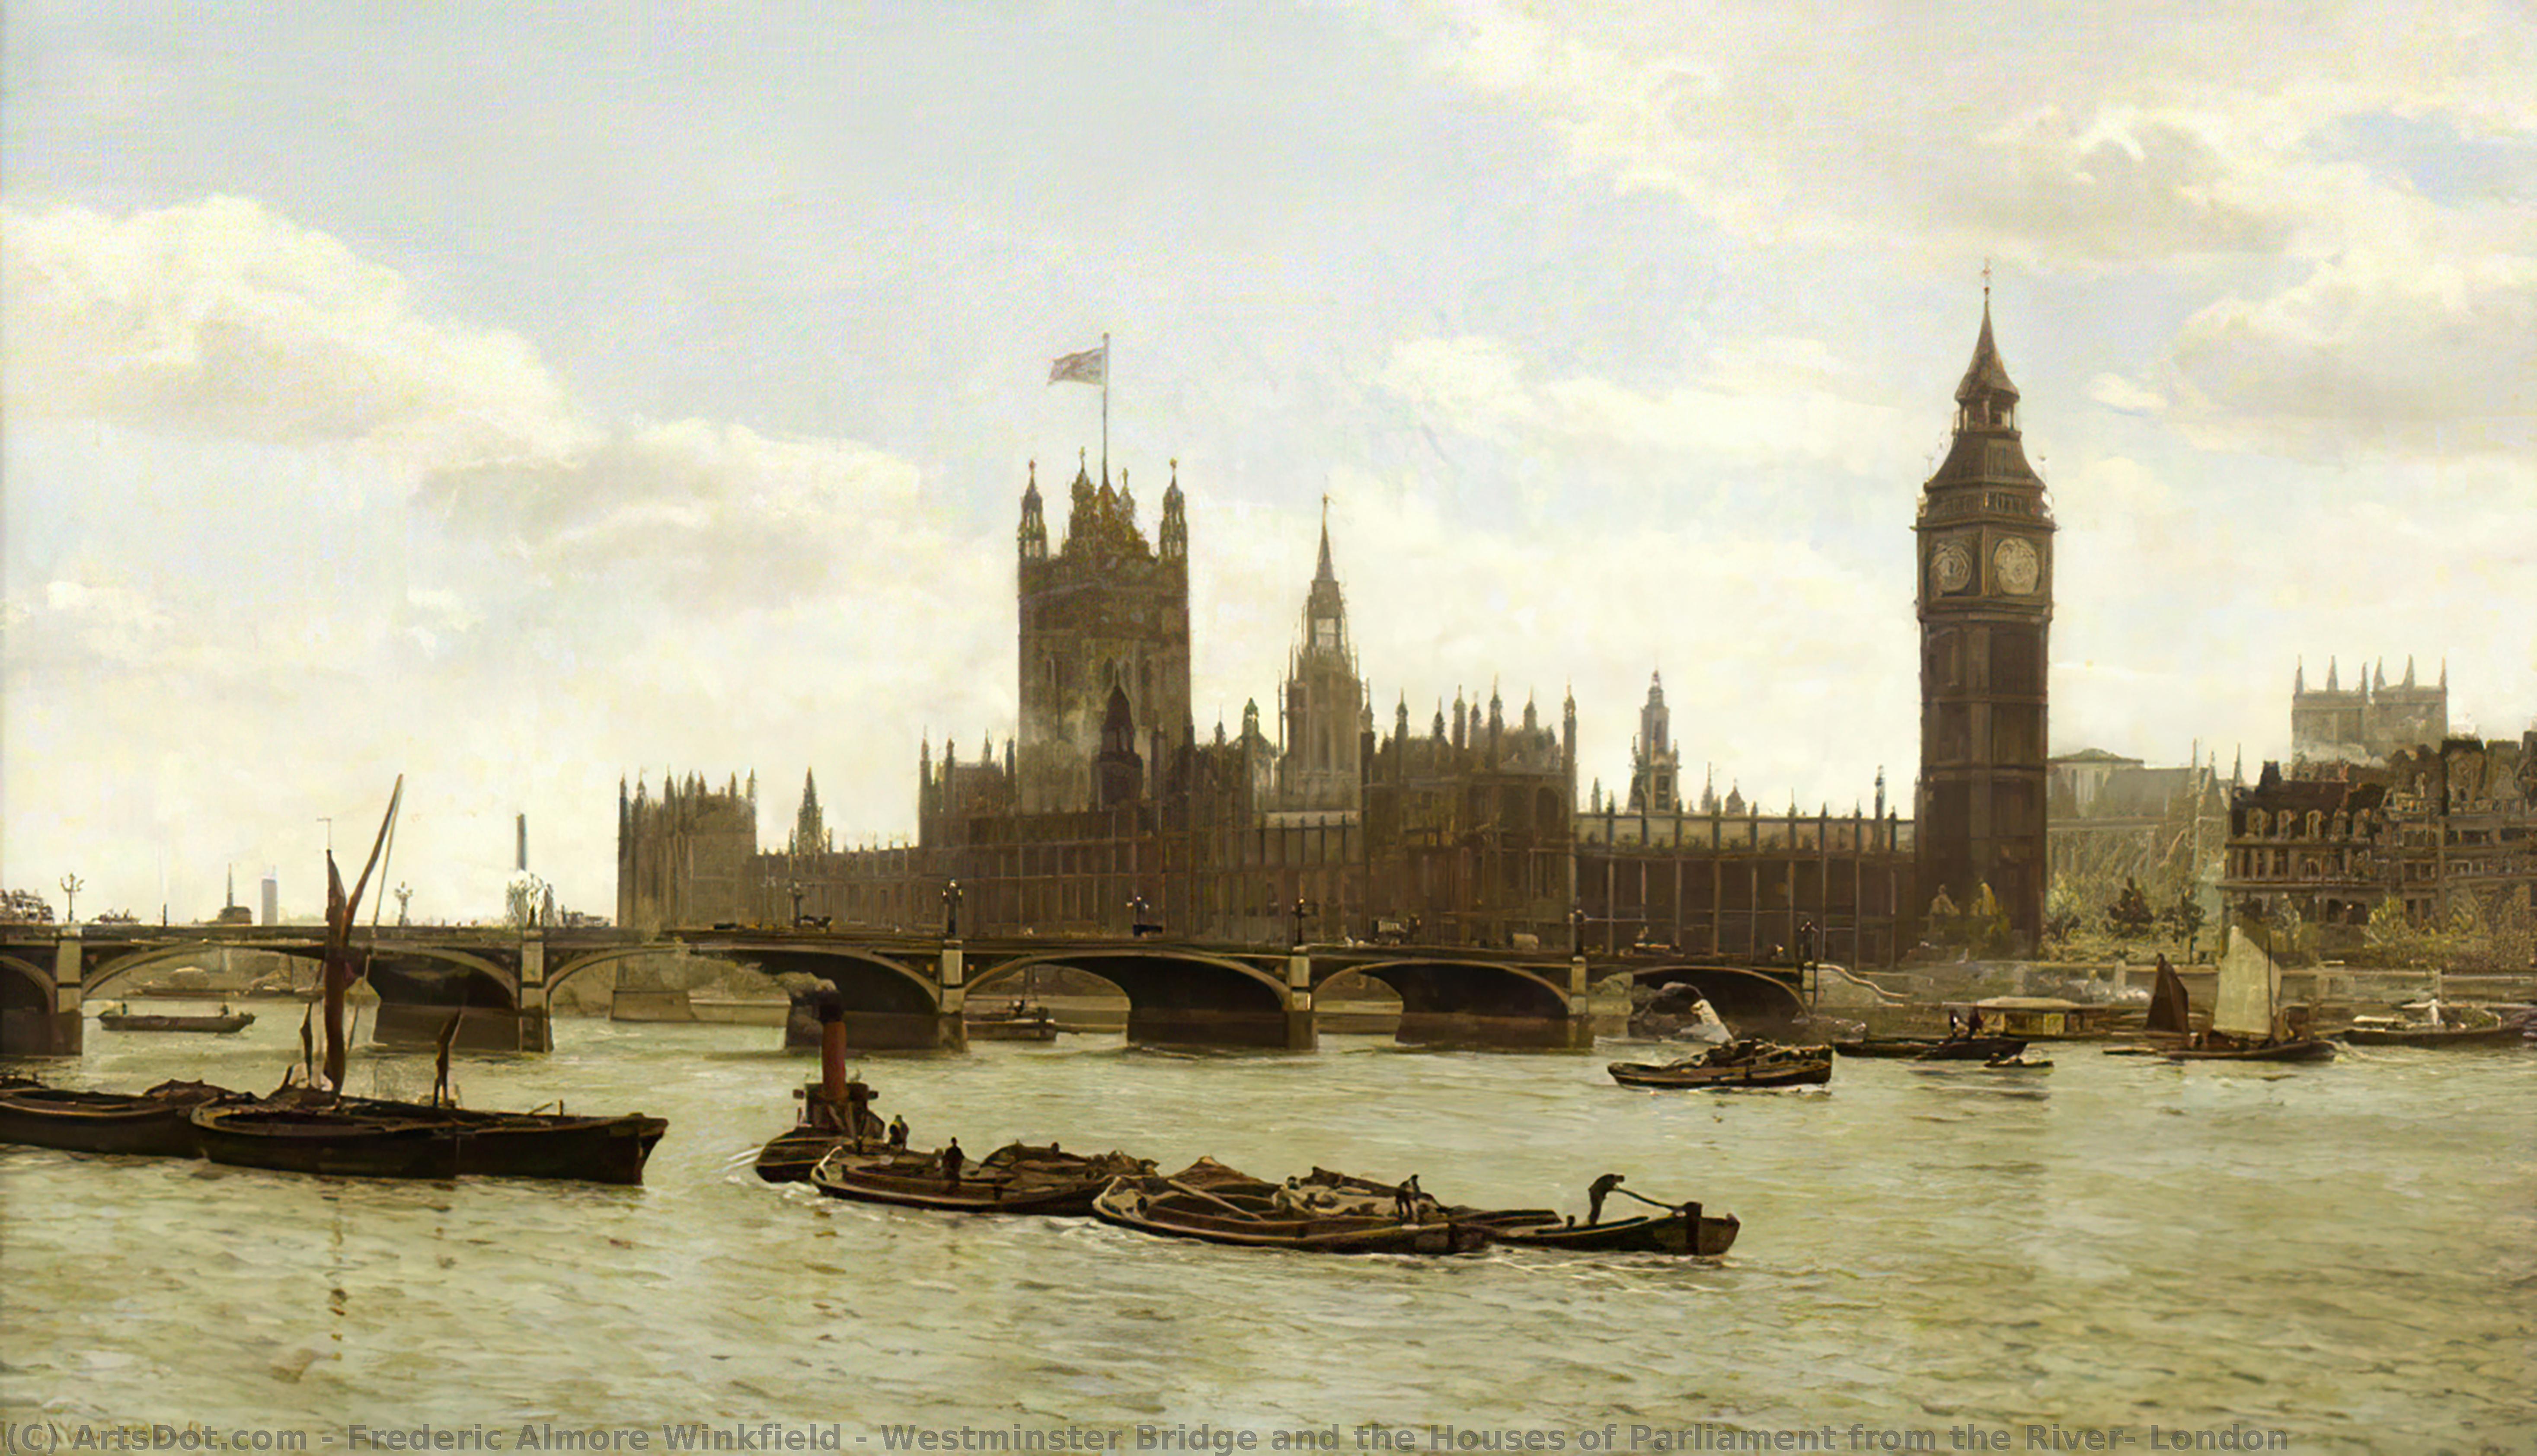 Westminster Bridge and the Houses of Parliament from the River, London, 1890 by Frederic Almore Winkfield Frederic Almore Winkfield | ArtsDot.com